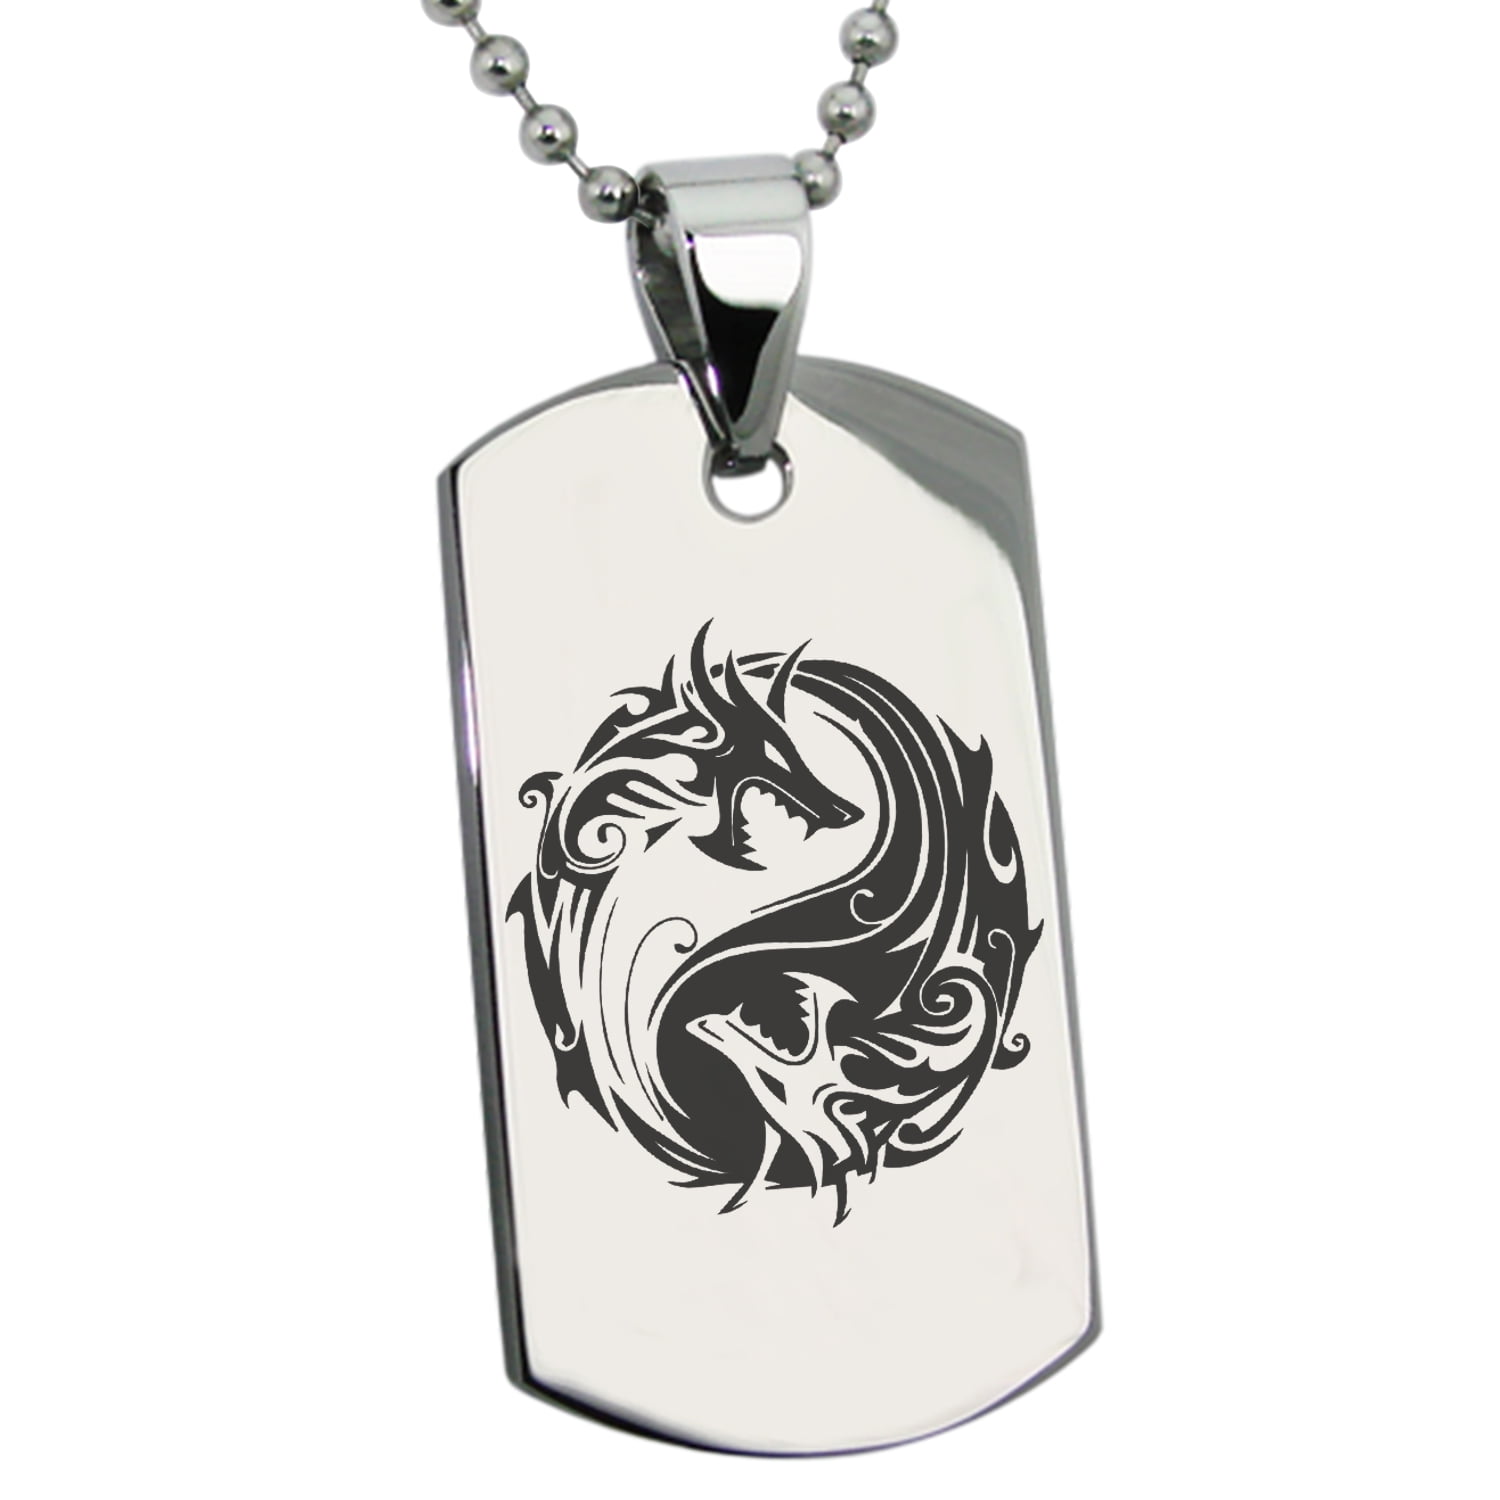 DOG TAGS STAINLESS STEEL DRAGON MENS BOYS  FATHERS DAY WEDDING Army navy M41 